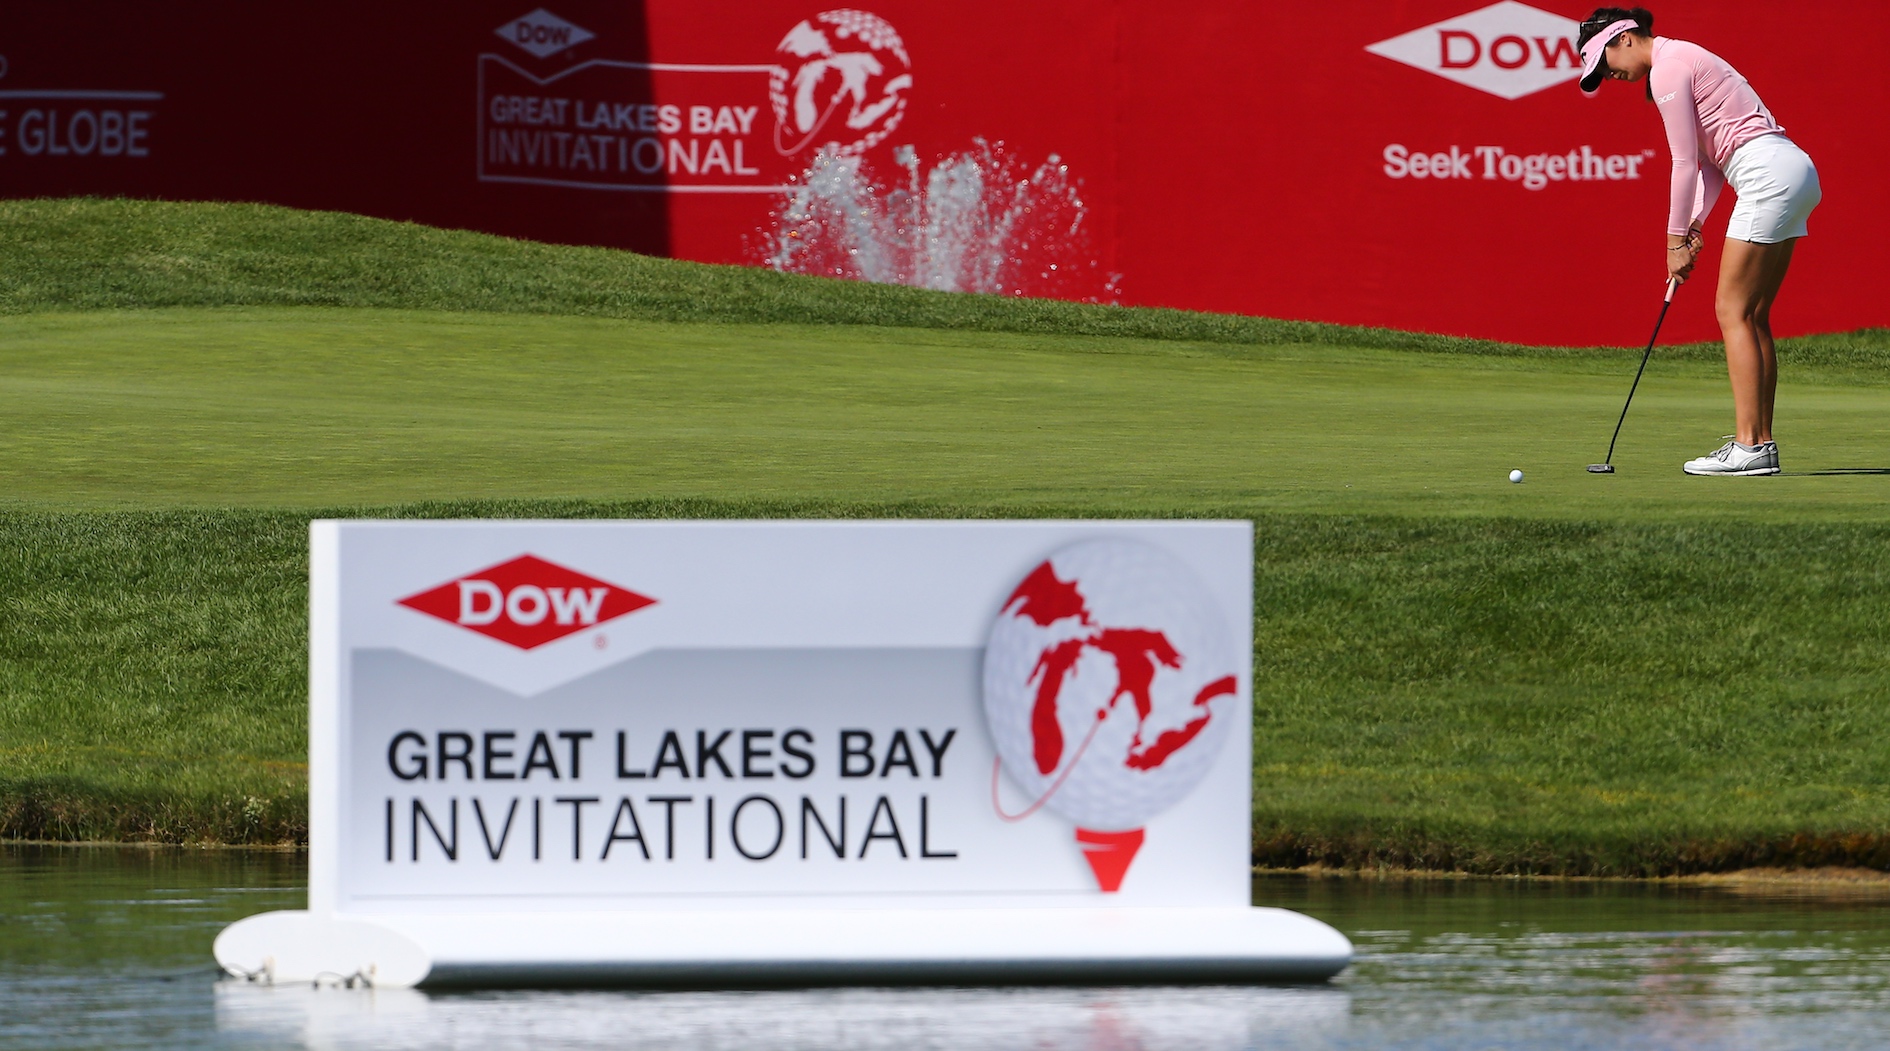 The Preview DOW Great Lakes Bay Invitational Golf Australia Magazine